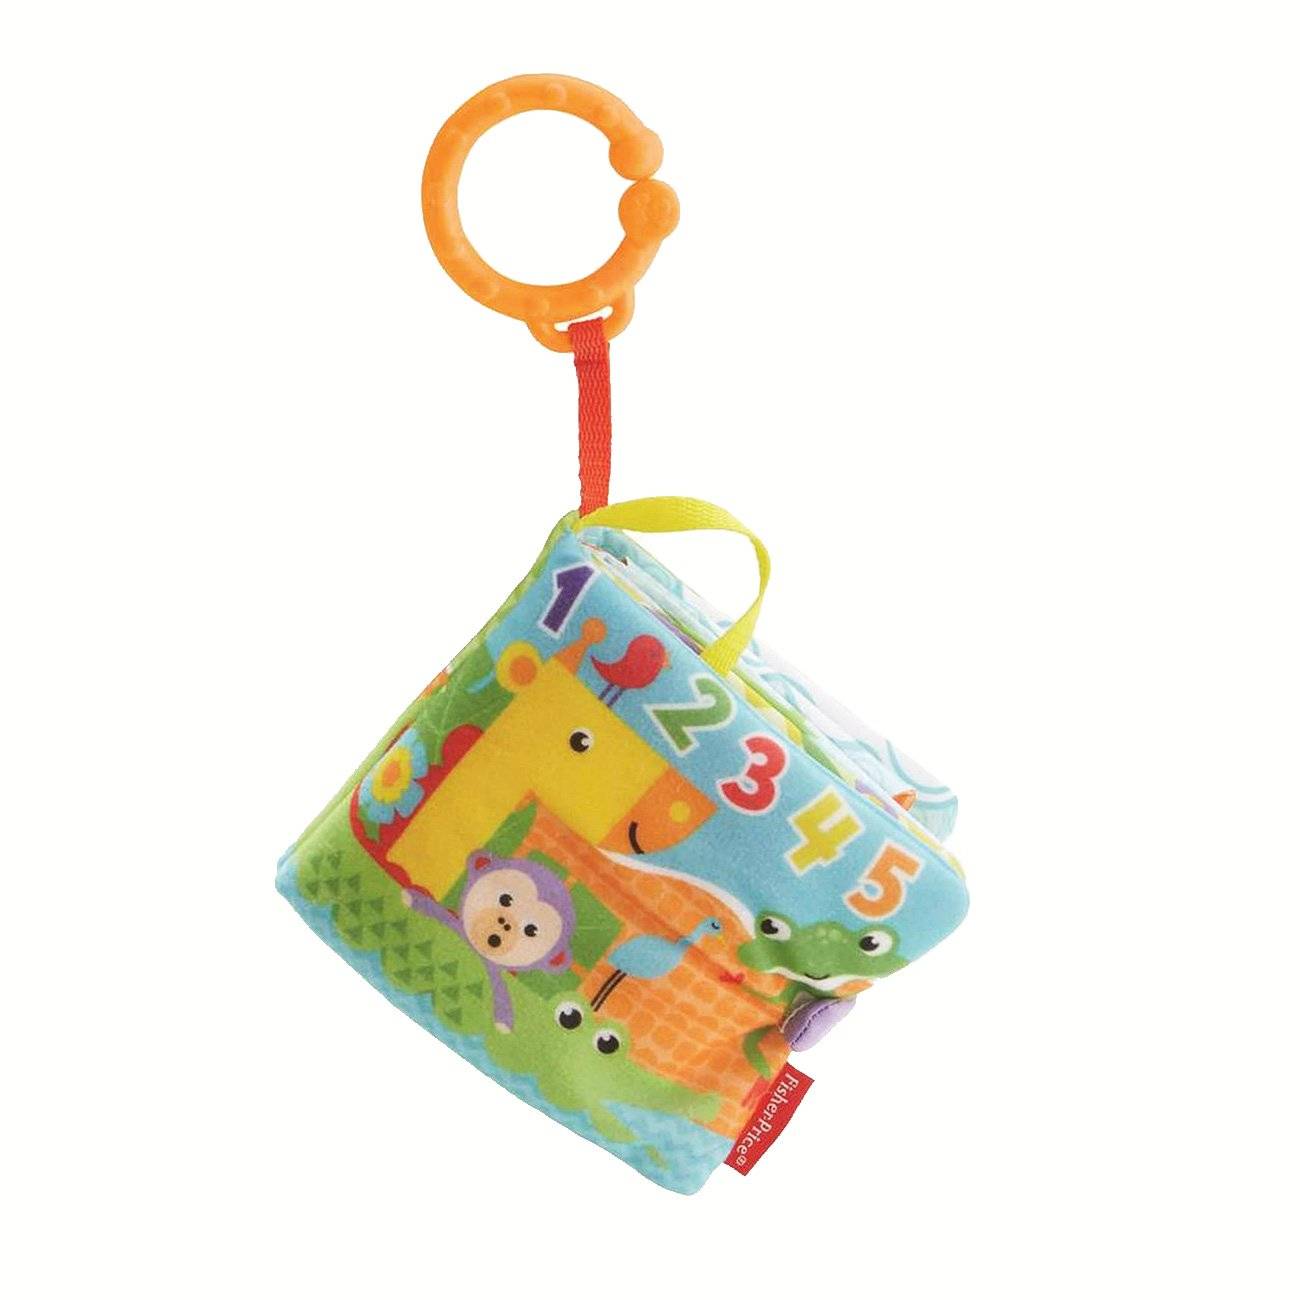 1-TO-5 ACTIVITY BOOK WITH MONKEY TEETHER